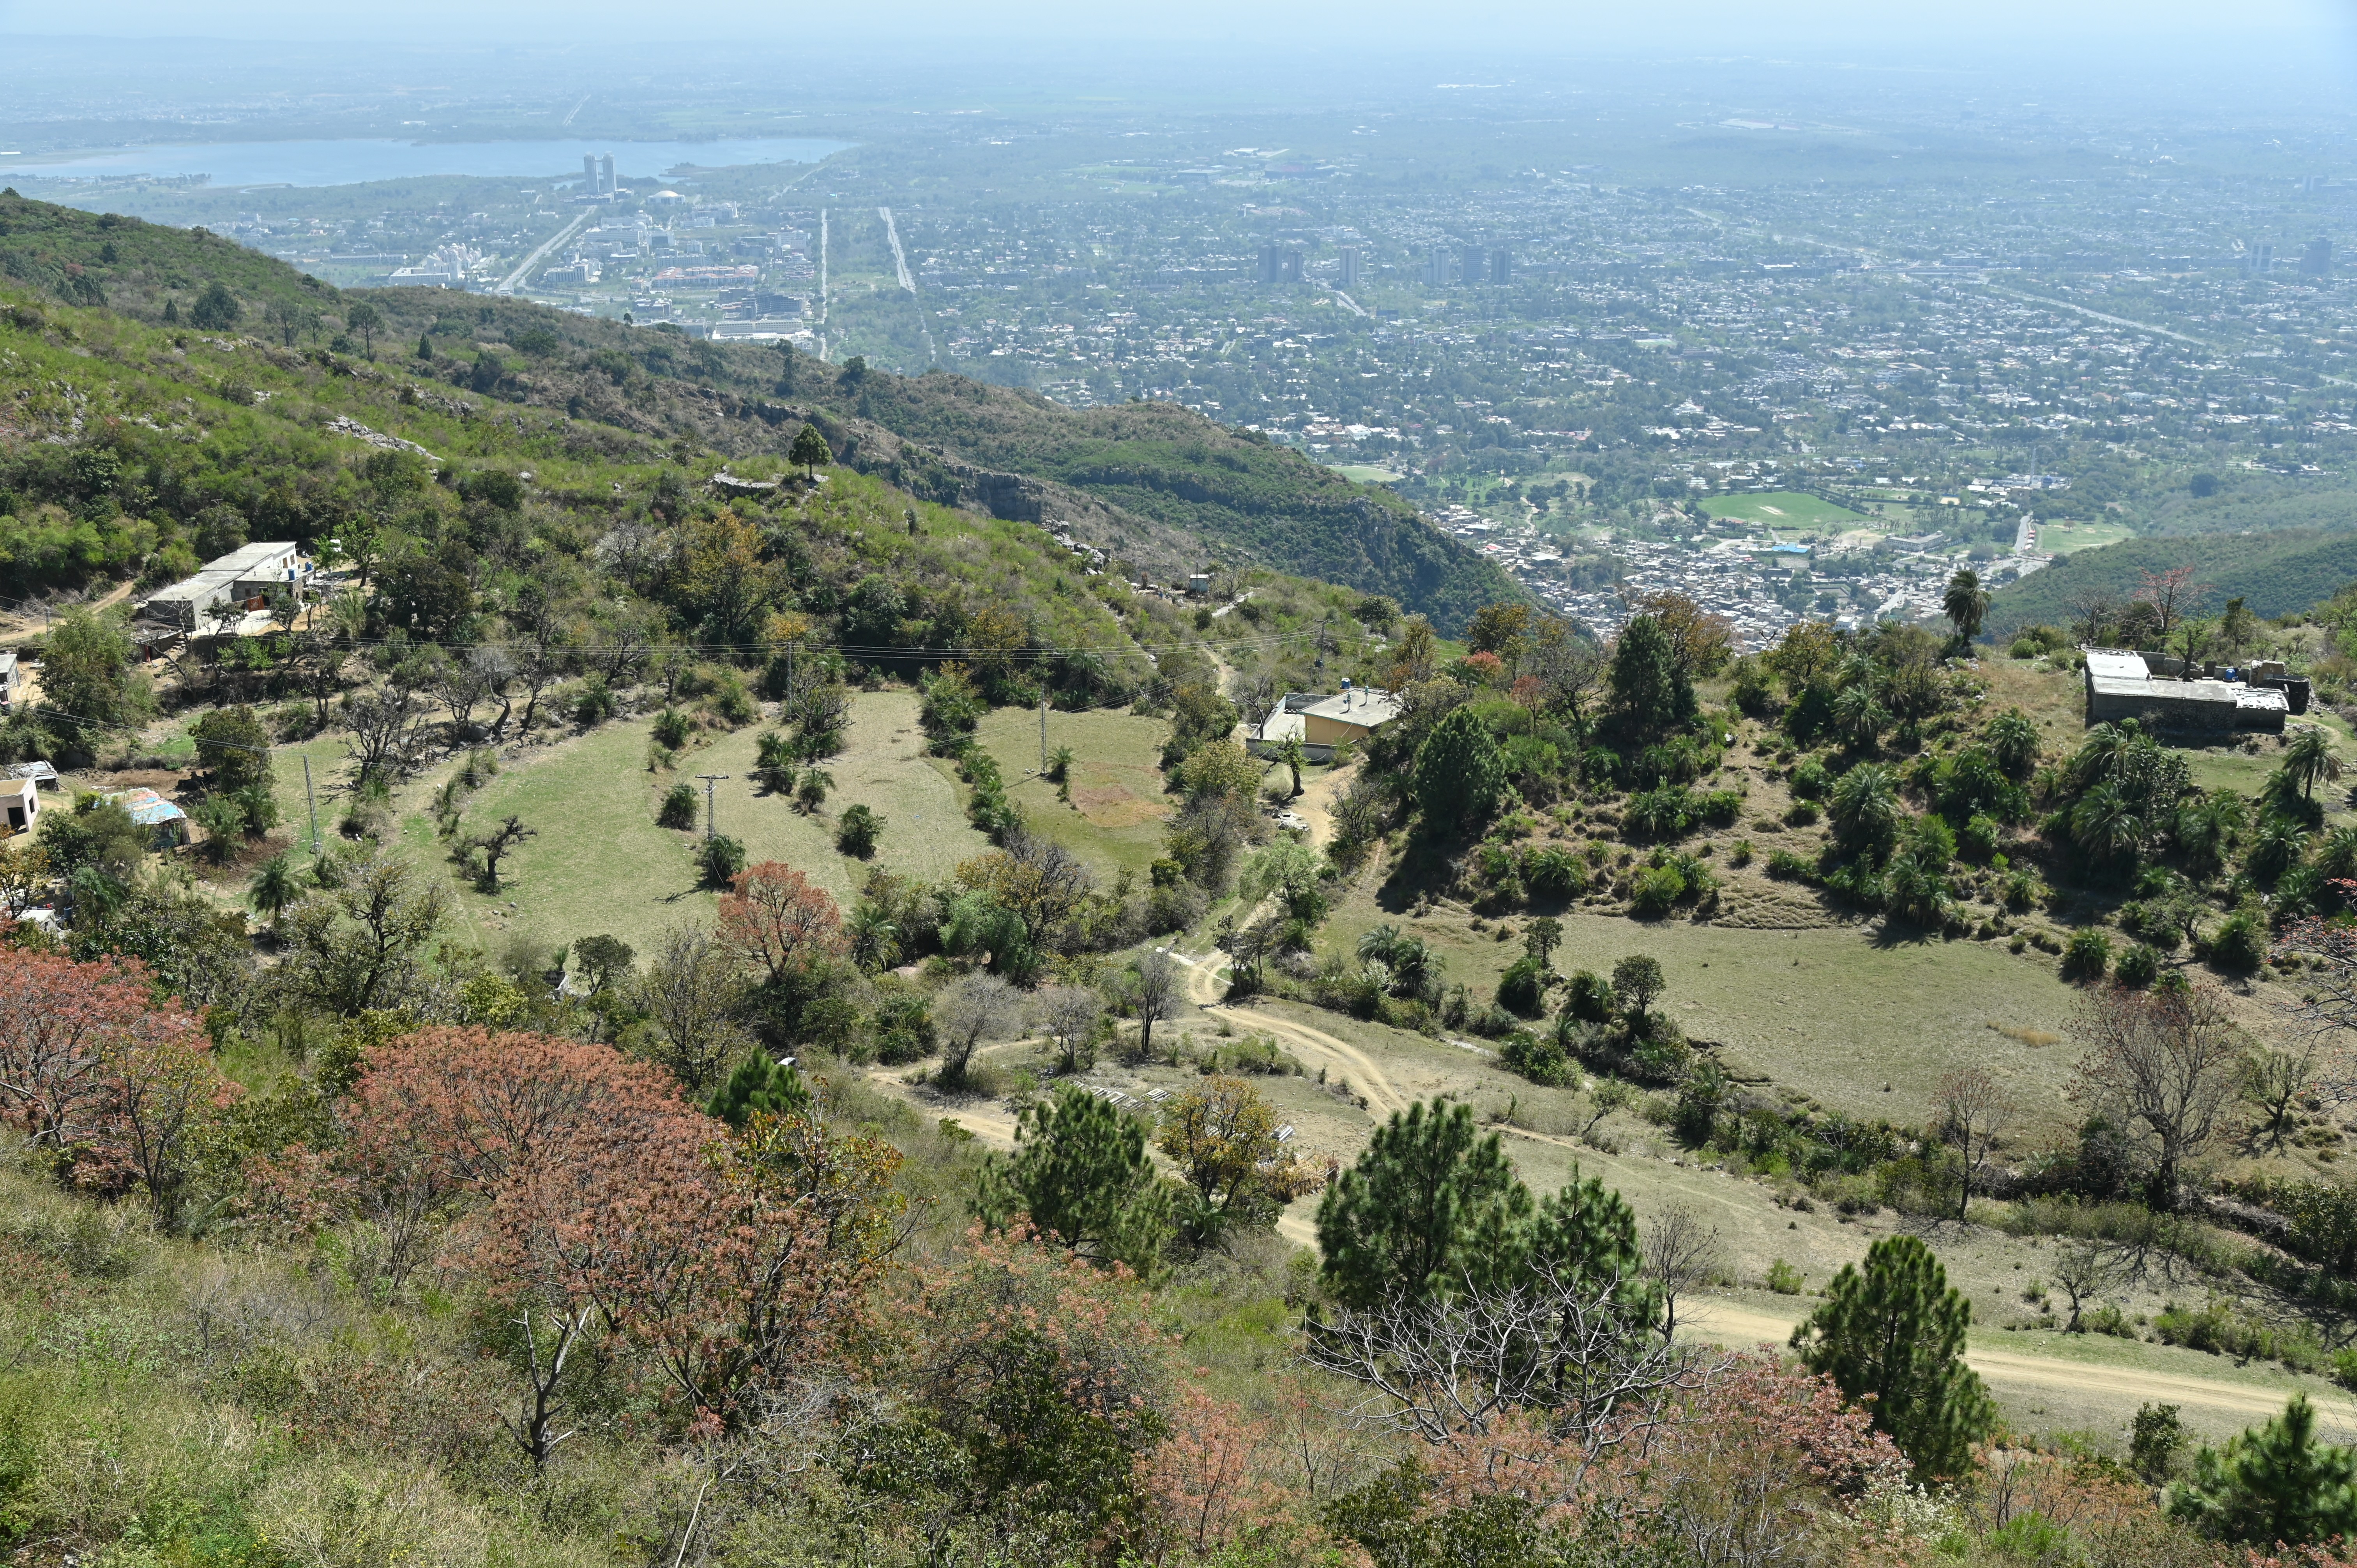 The aerial view of Islamabad City from Pir Sohawa